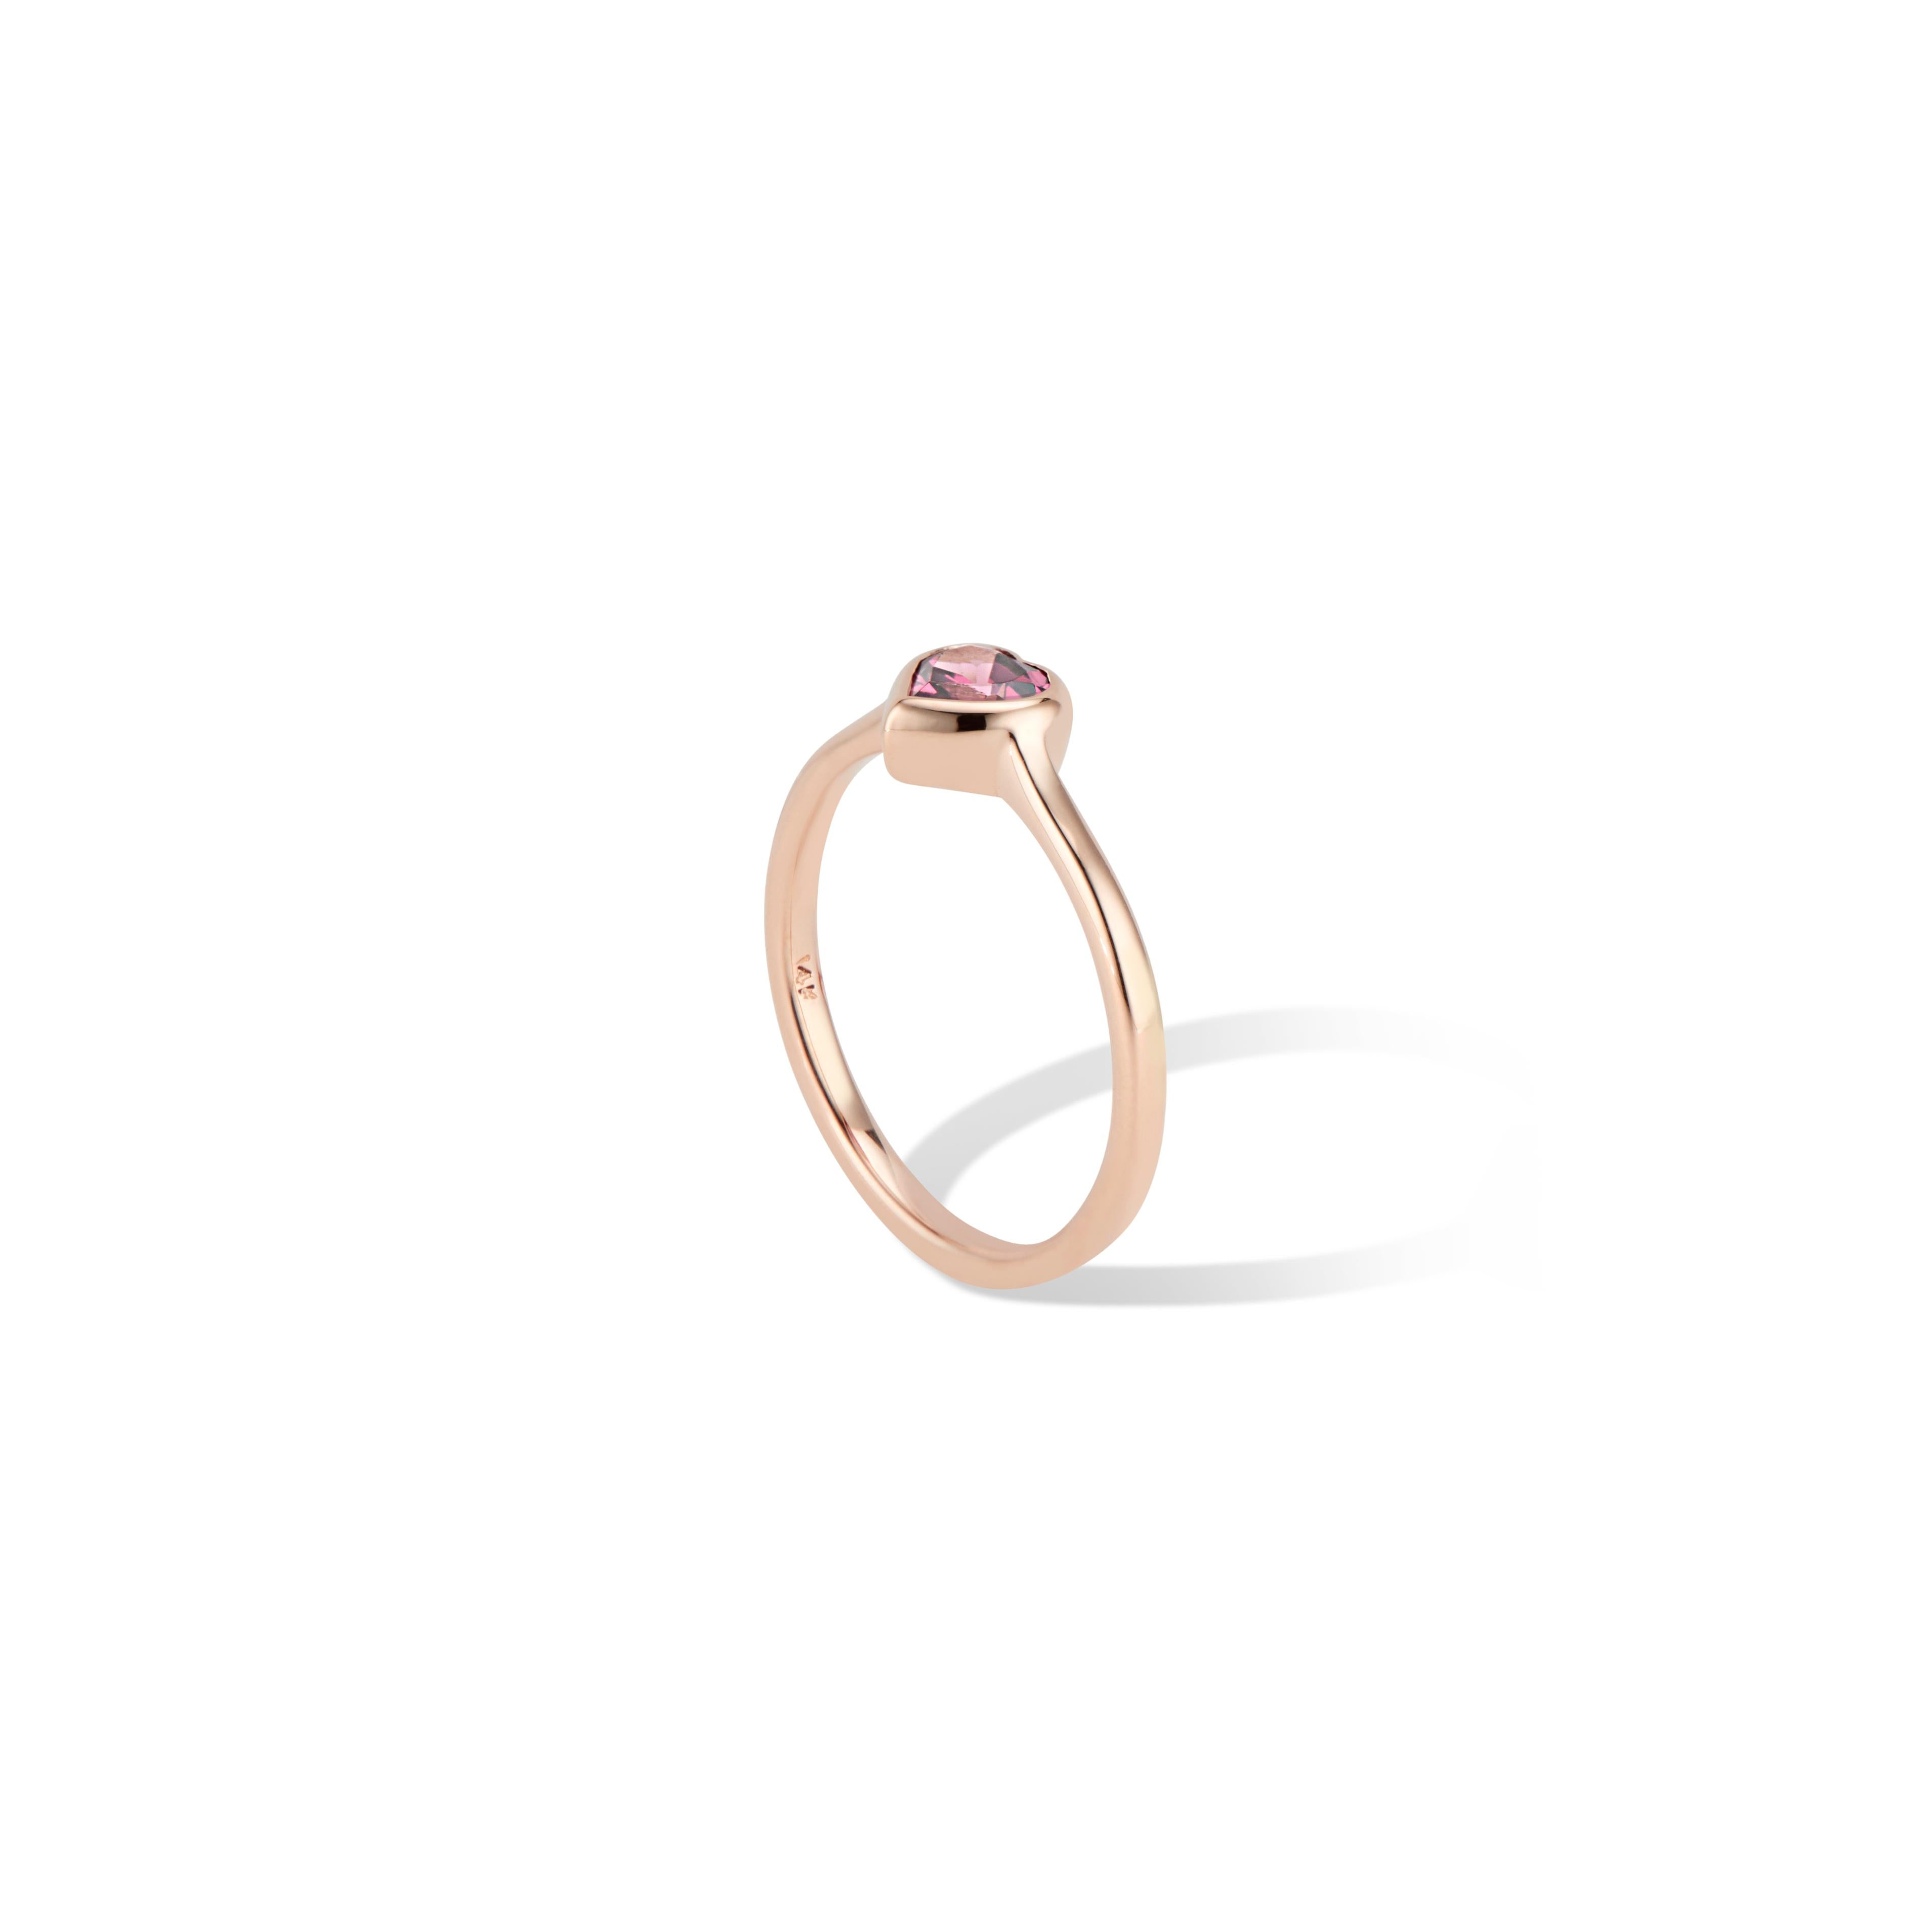 This petite Gold Heart Ring is perfect for stacking.
Featuring a striking ½ carat (.50tcw) Rhodolite Garnet Heart in a high polished 14k rose gold bezel setting.
Available in 14k rose, yellow or white gold.
Ring Size: US Size 6 - complimentary